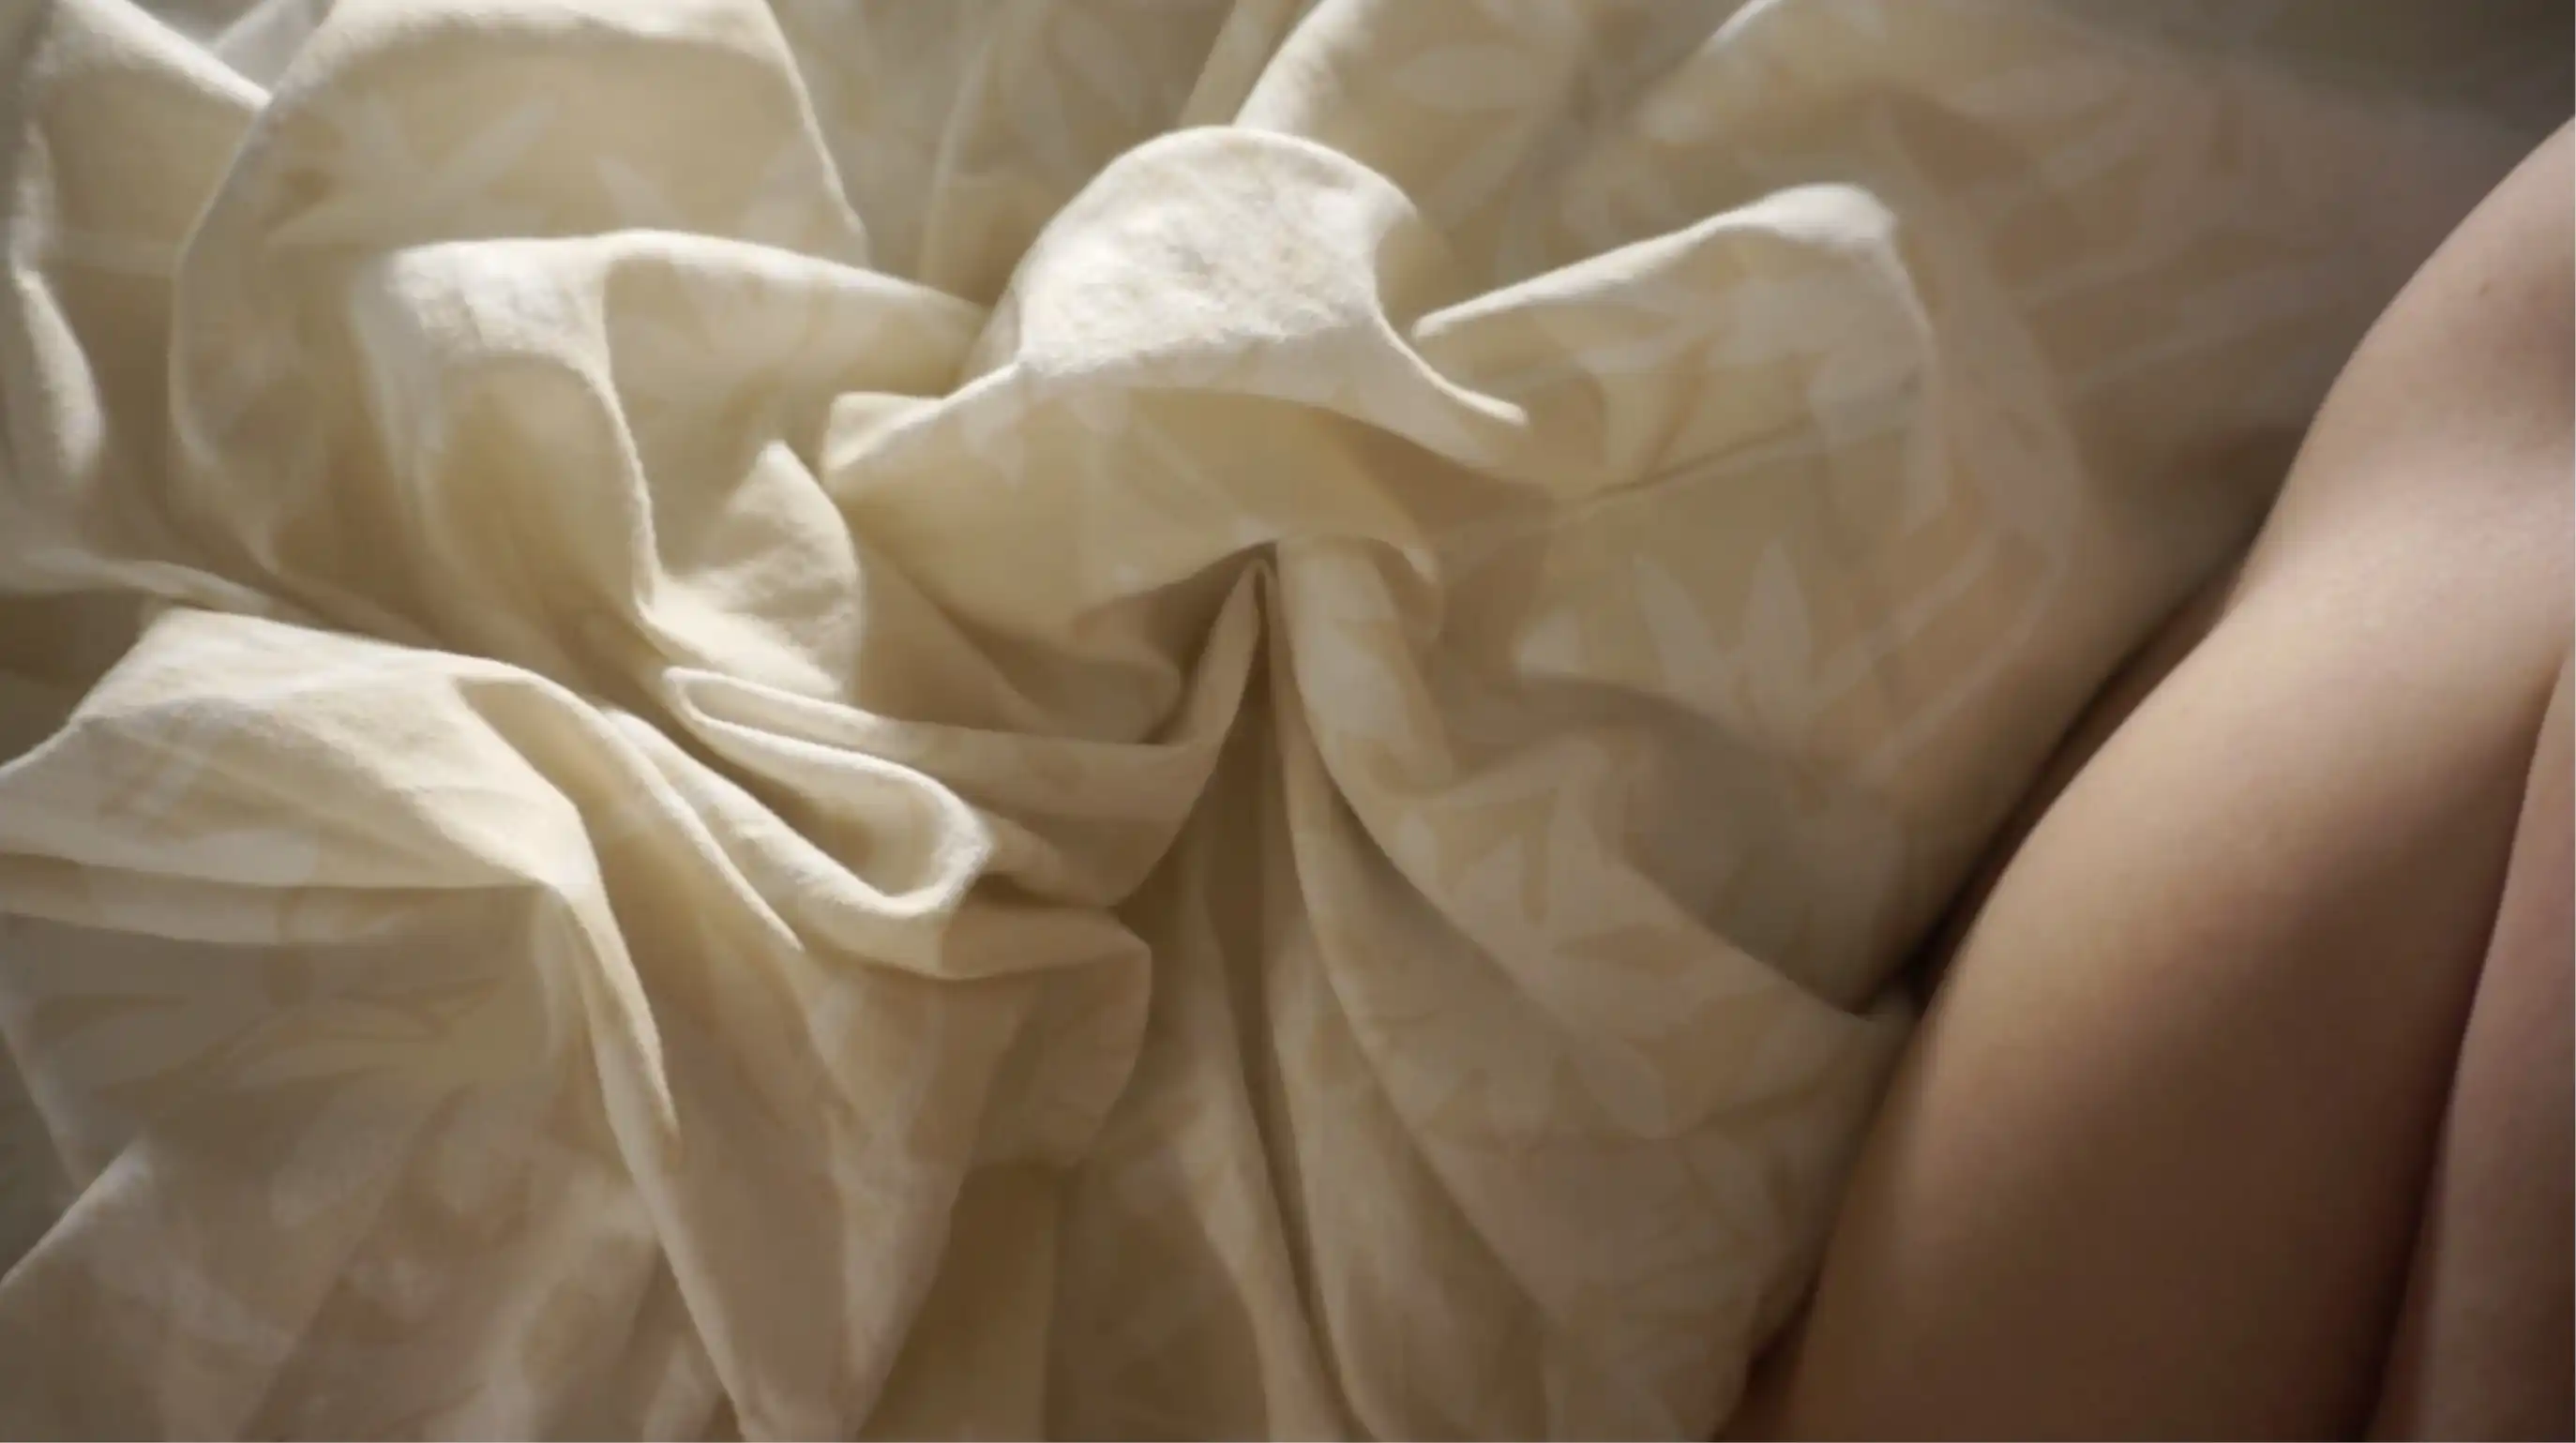 An unintelligible body part over wrinkled bedding